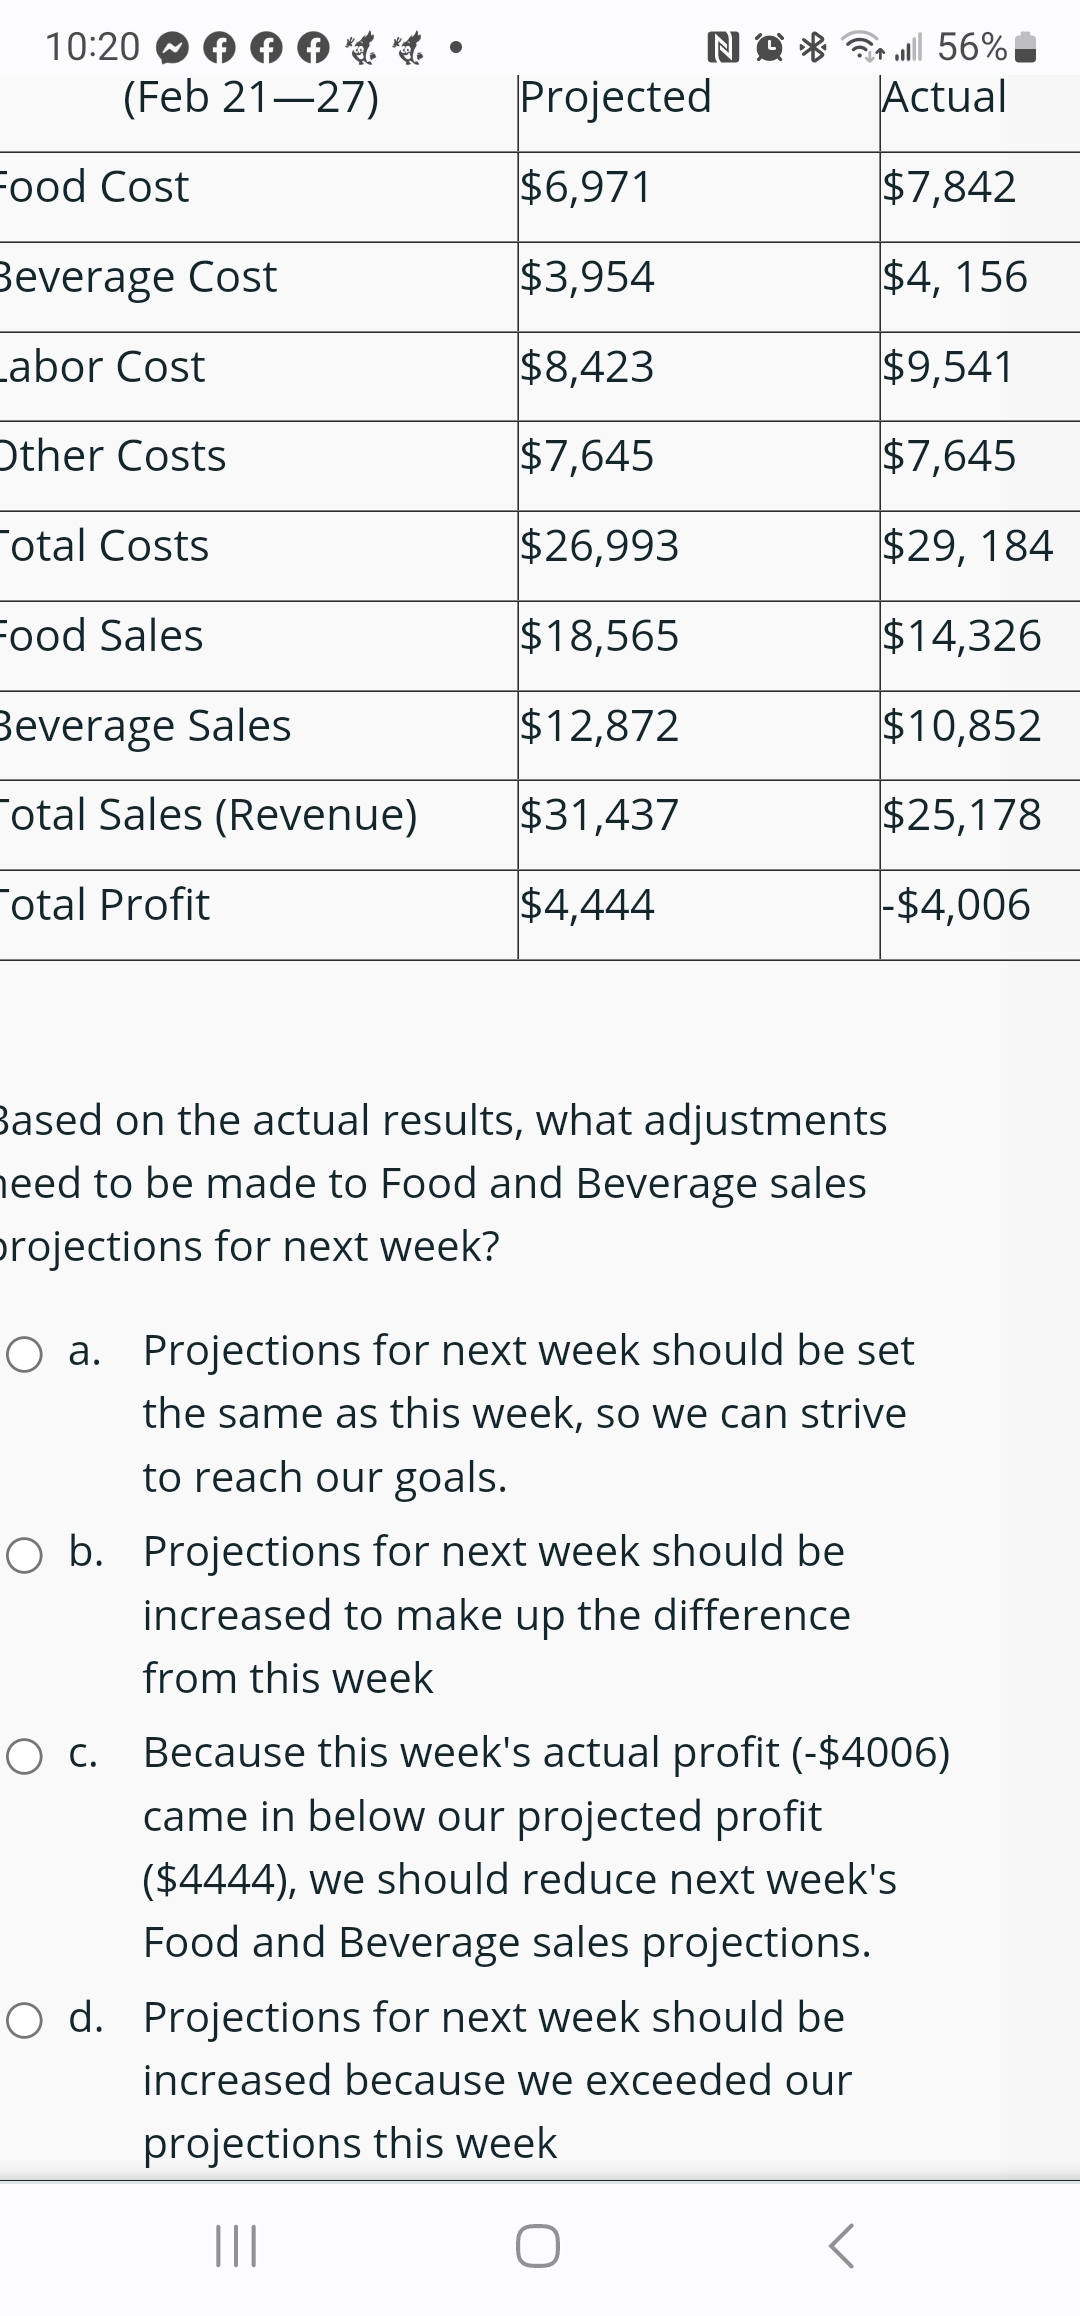 10:20
(Feb 21-27)
Food Cost
044
Beverage Cost
Labor Cost
Other Costs
Total Costs
Food Sales
Beverage Sales
Total Sales (Revenue)
Total Profit
•
N
Projected
$6,971
$3,954
$8,423
$7,645
$26,993
$18,565
$12,872
$31,437
$4,444
56% السم
Based on the actual results, what adjustments
need to be made to Food and Beverage sales
projections for next week?
O b. Projections for next week should be
increased to make up the difference
from this week
Actual
$7,842
$4, 156
$9,541
$7,645
$29, 184
$14,326
$10,852
$25,178
-$4,006
O a. Projections for next week should be set
the same as this week, so we can strive
to reach our goals.
O d. Projections for next week should be
increased because we exceeded our
projections this week
|||
O
O c. Because this week's actual profit (-$4006)
came in below our projected profit
($4444), we should reduce next week's
Food and Beverage sales projections.